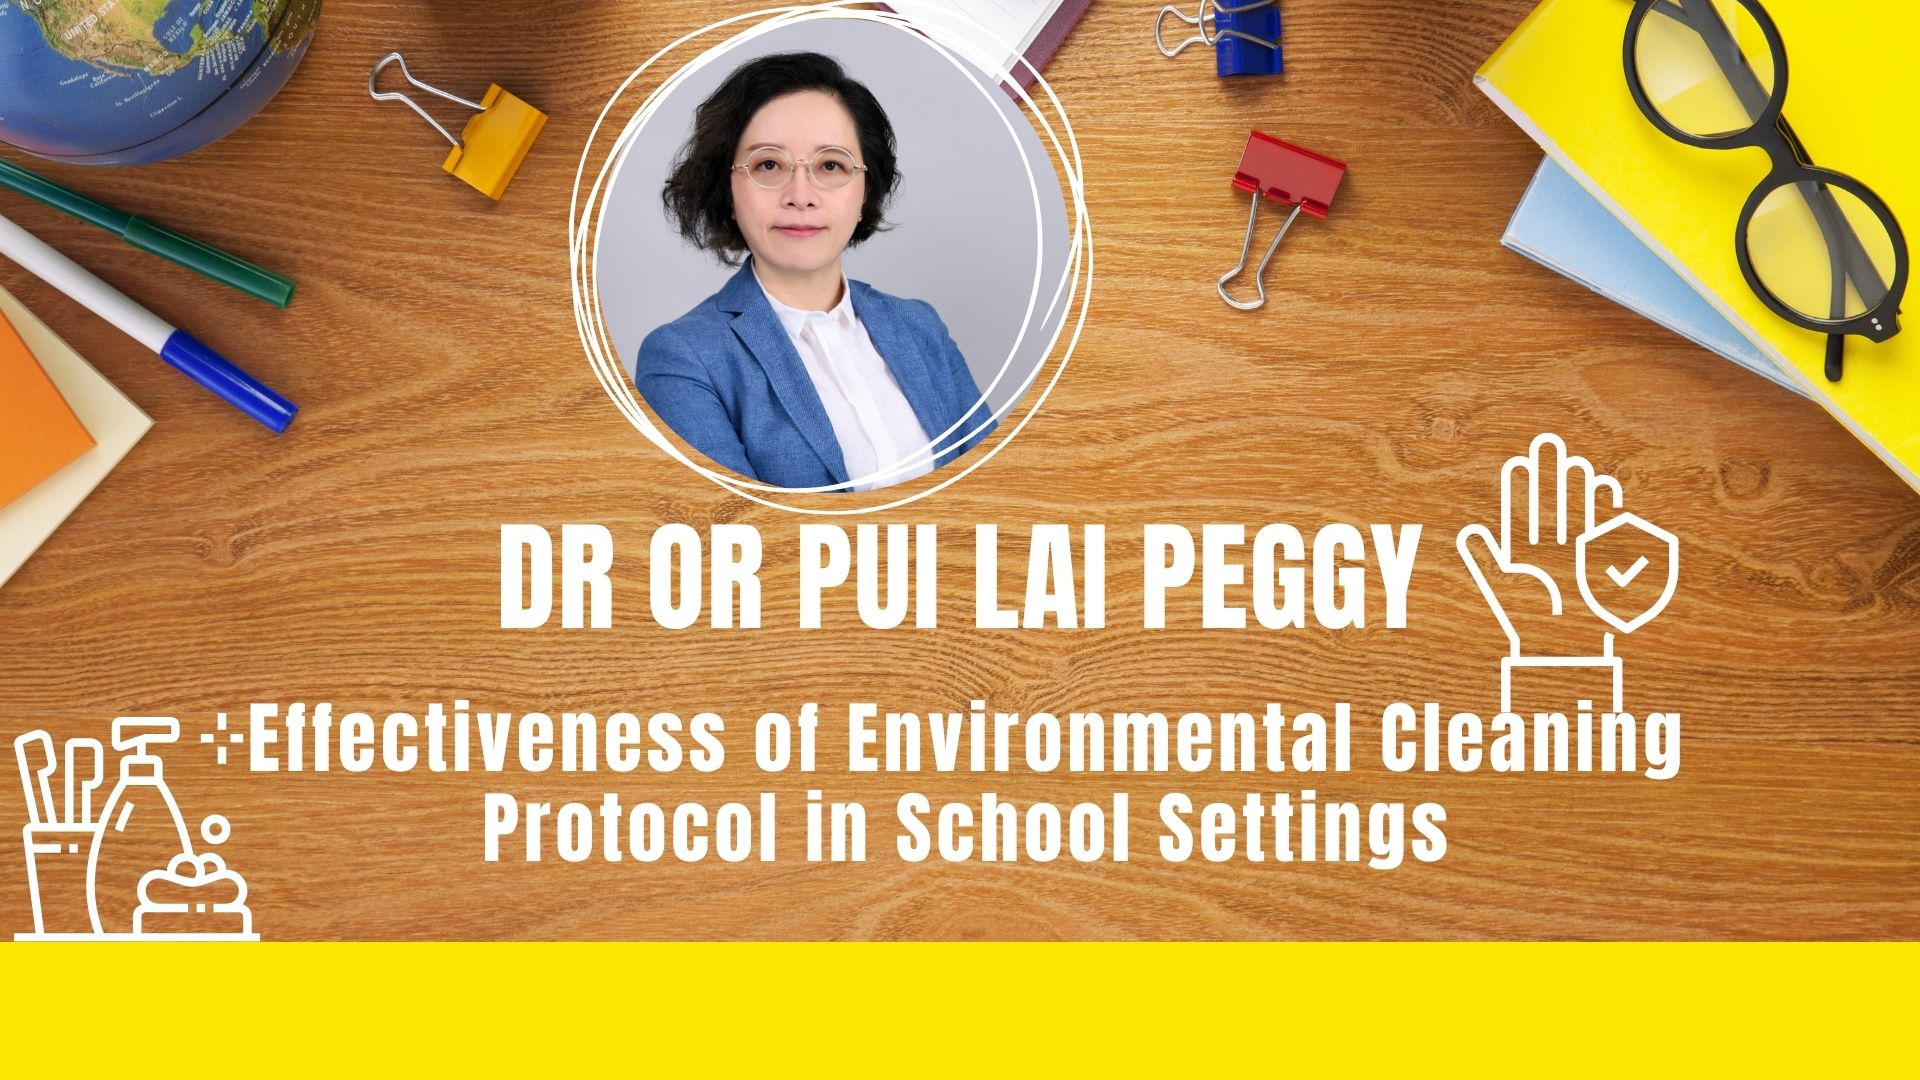 Dr OR Pui Lai Peggy